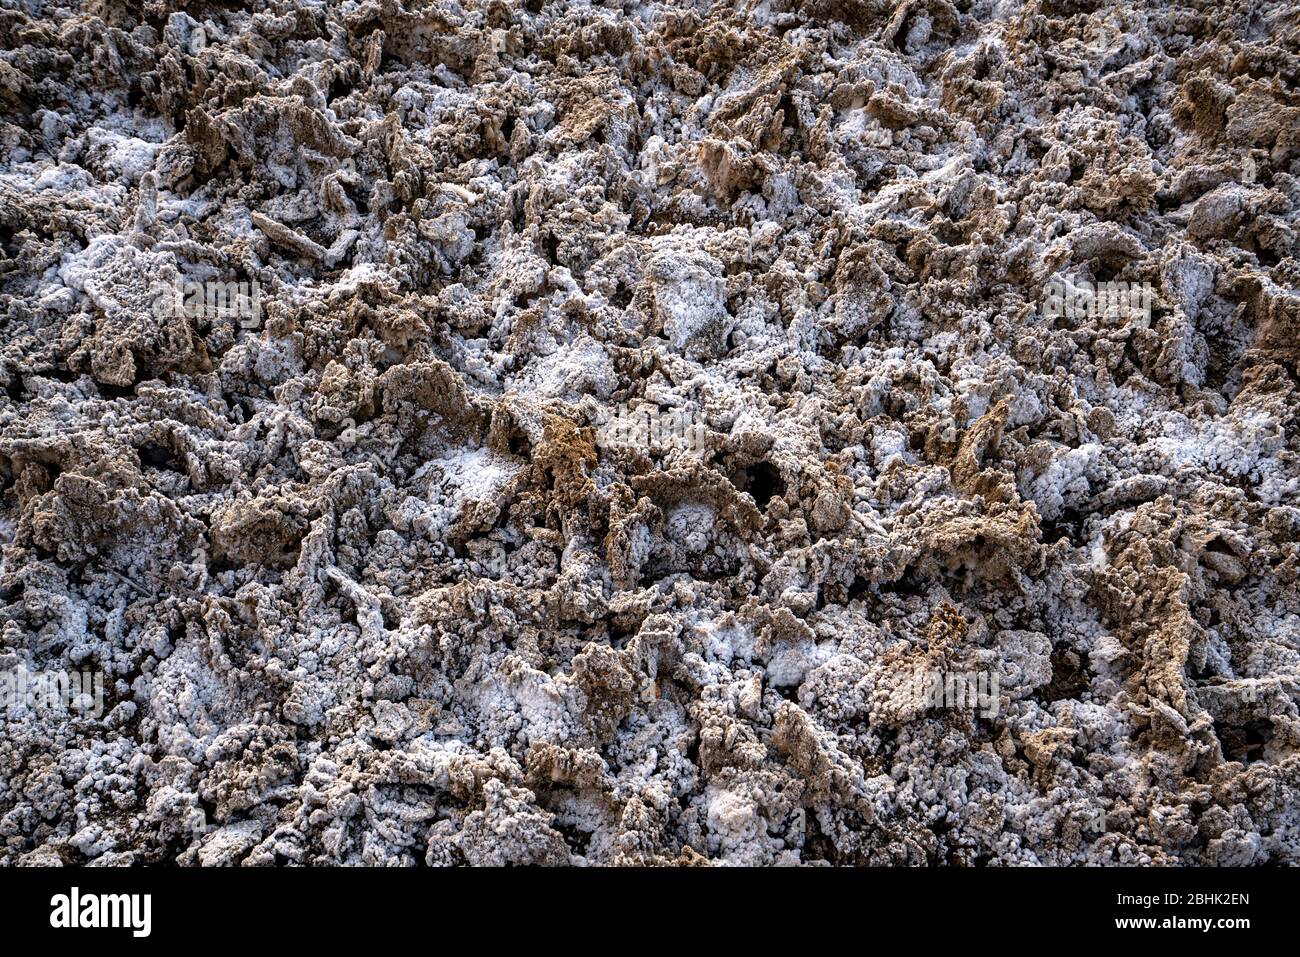 Closeup image of crusty salt formations at Badwater Basin in Death Valley national Park, California Stock Photo